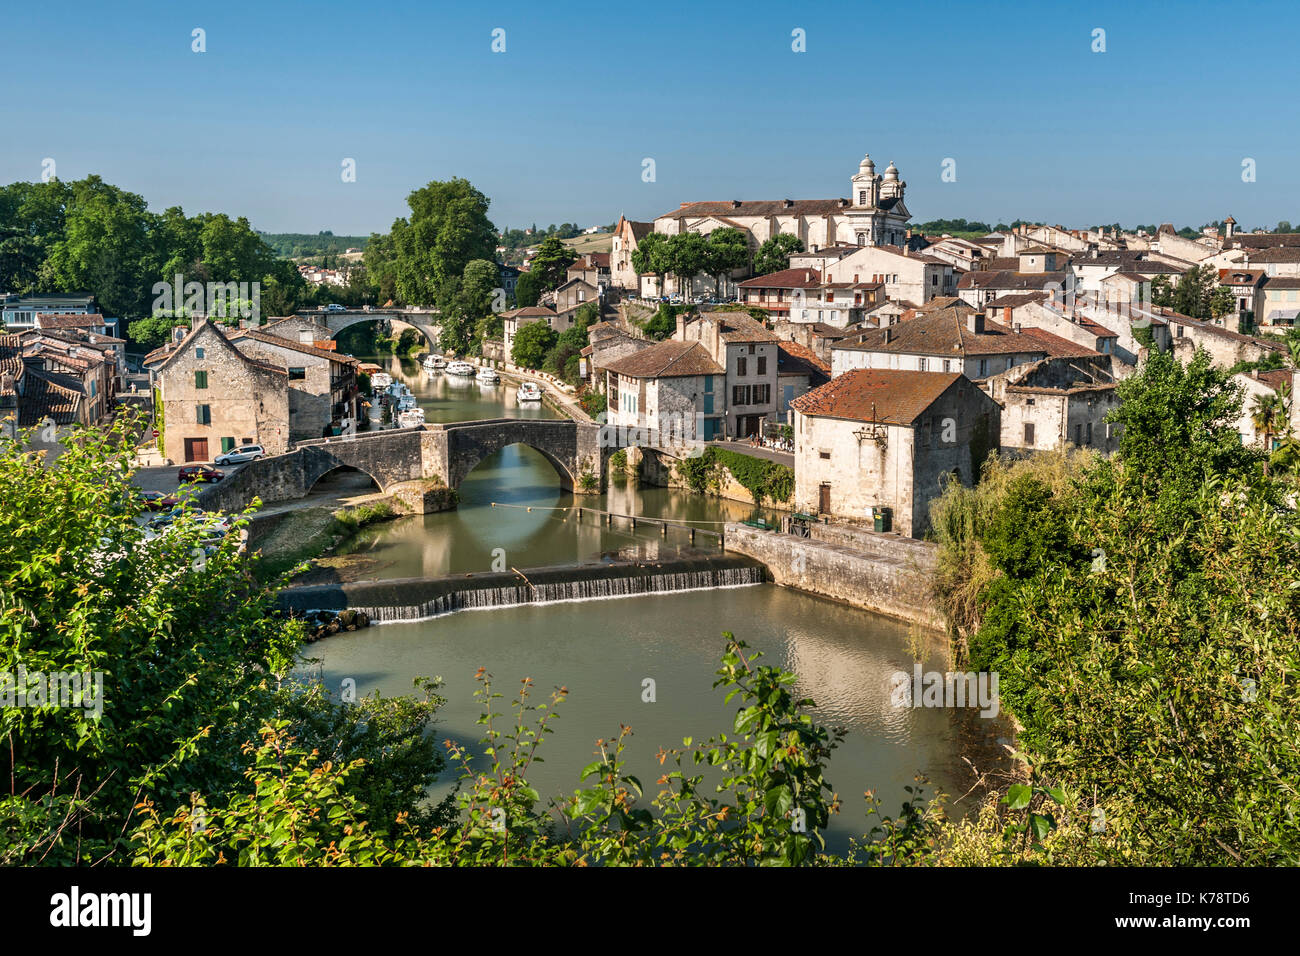 The town of Nérac and the Petite Baïse River in the Dordogne region of southwest France. Stock Photo